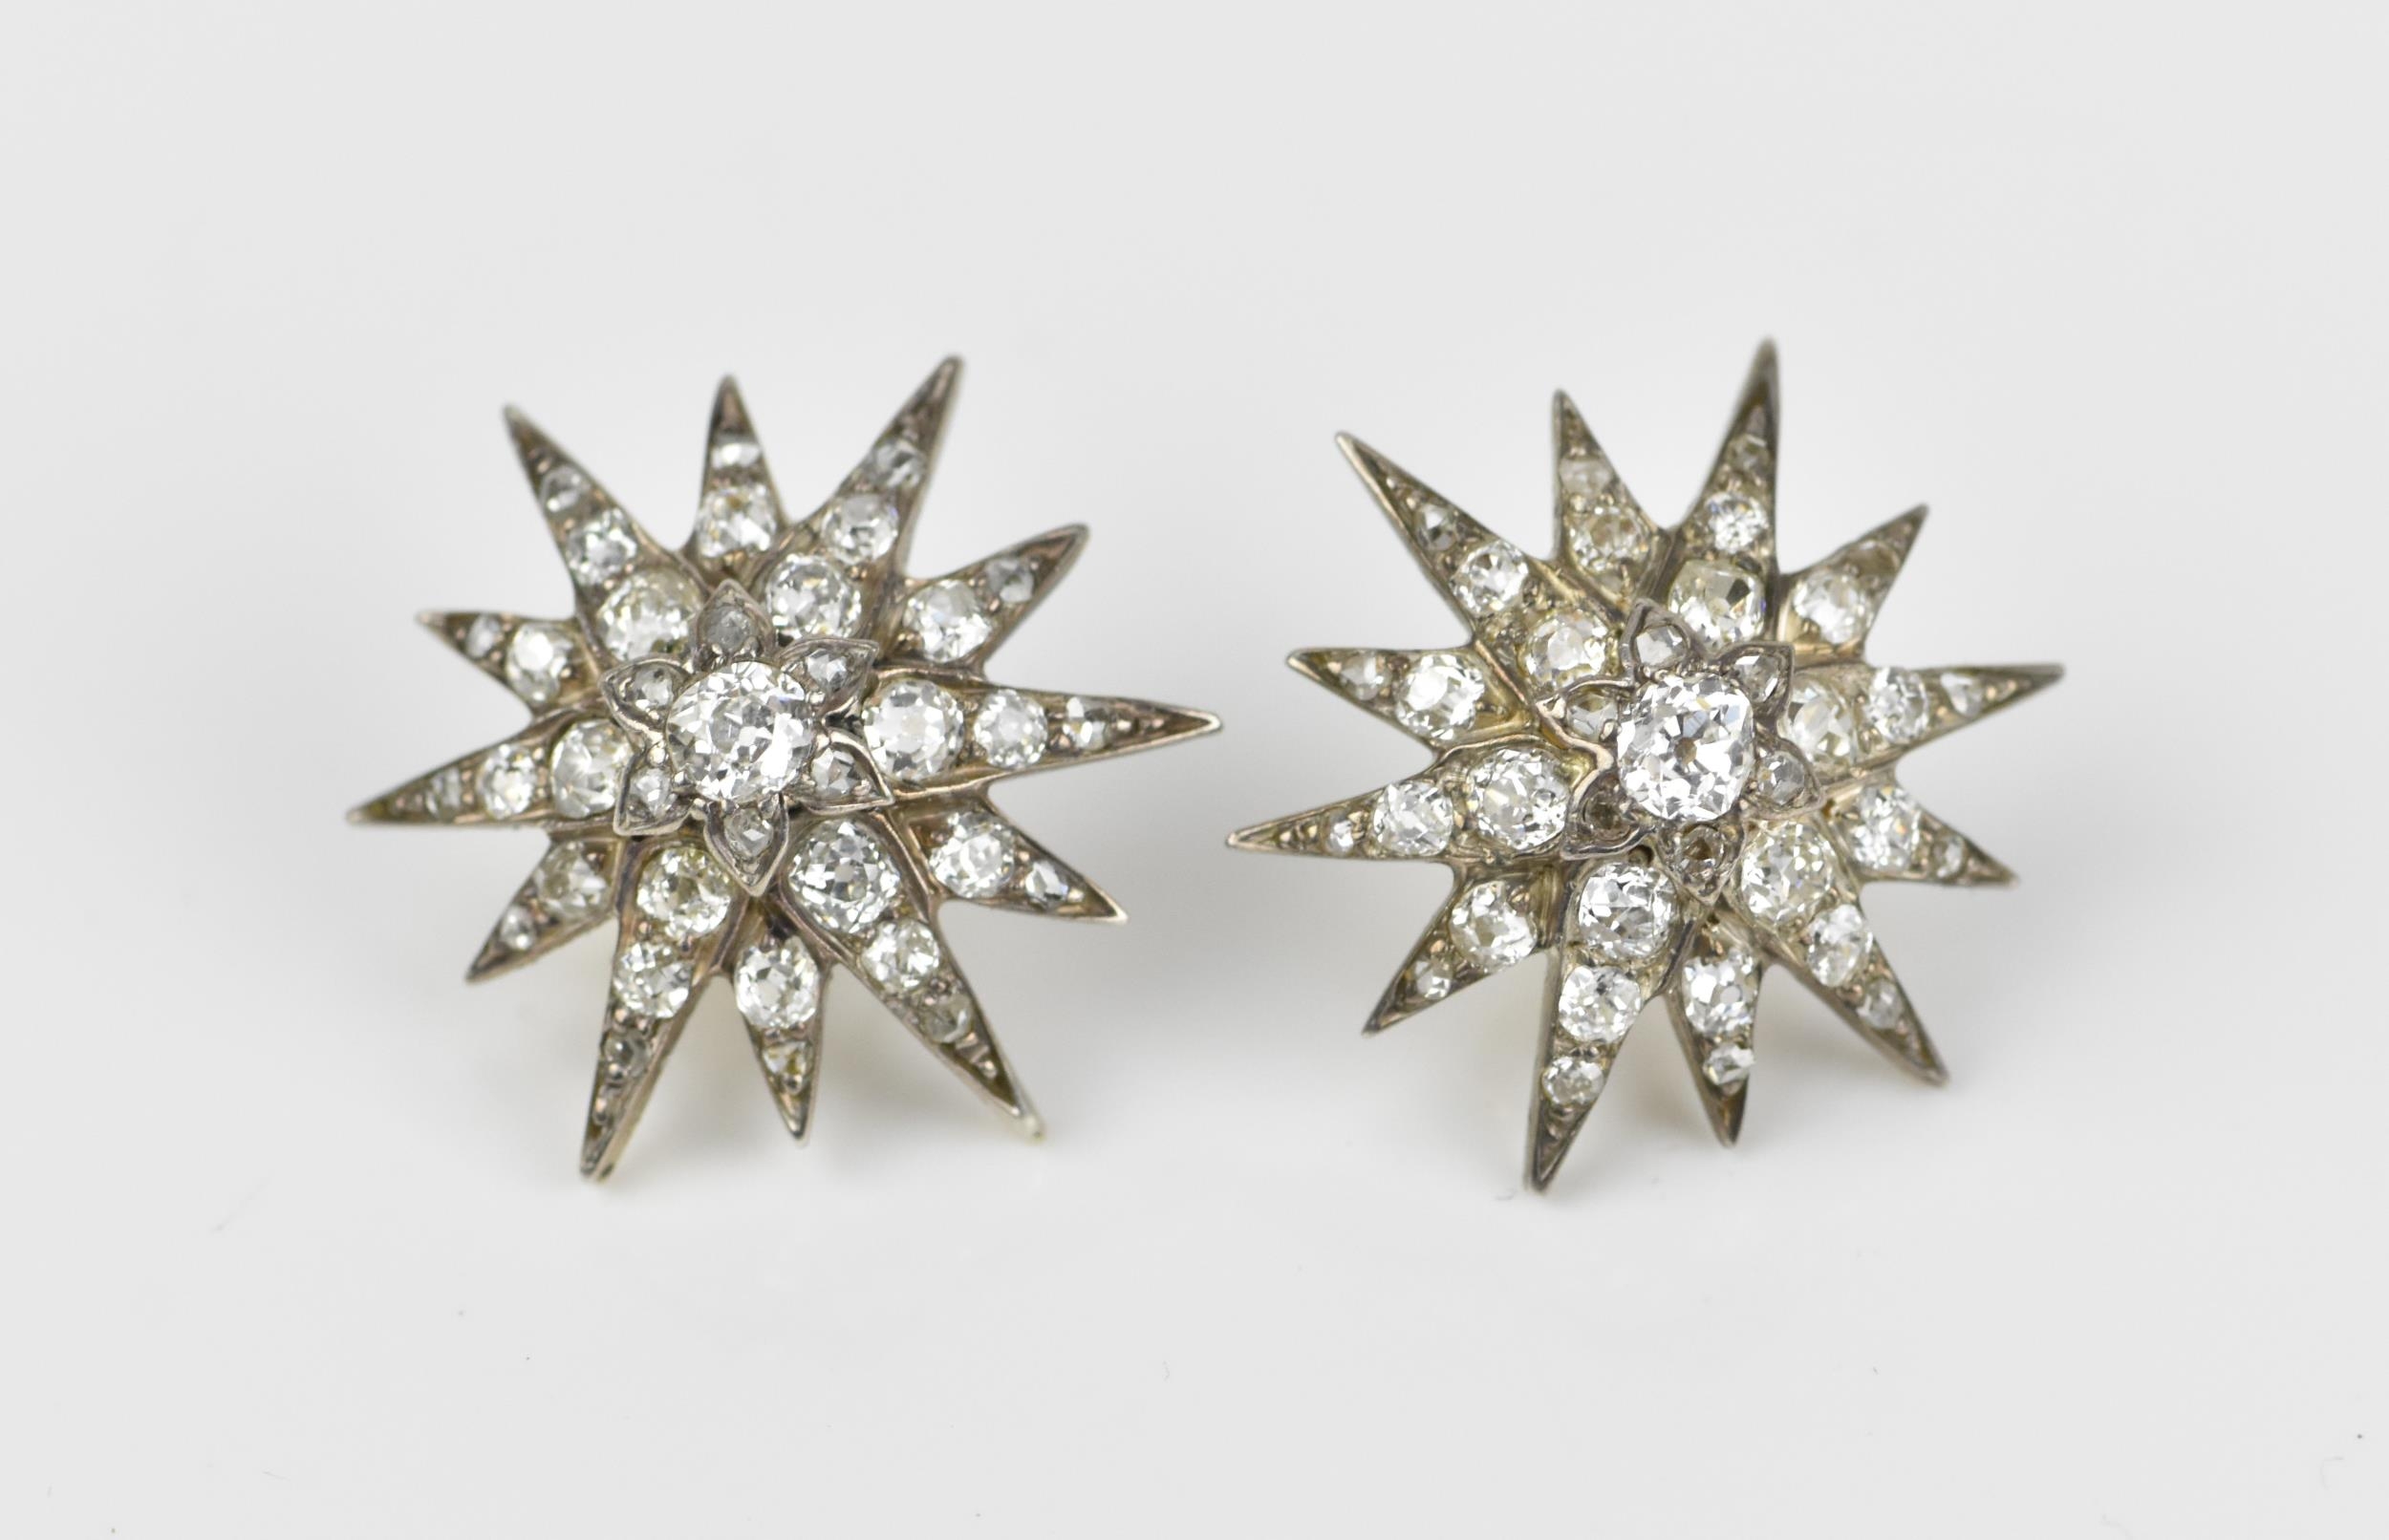 A pair of early 20th century white metal and diamond starburst earrings, set with old mine cut